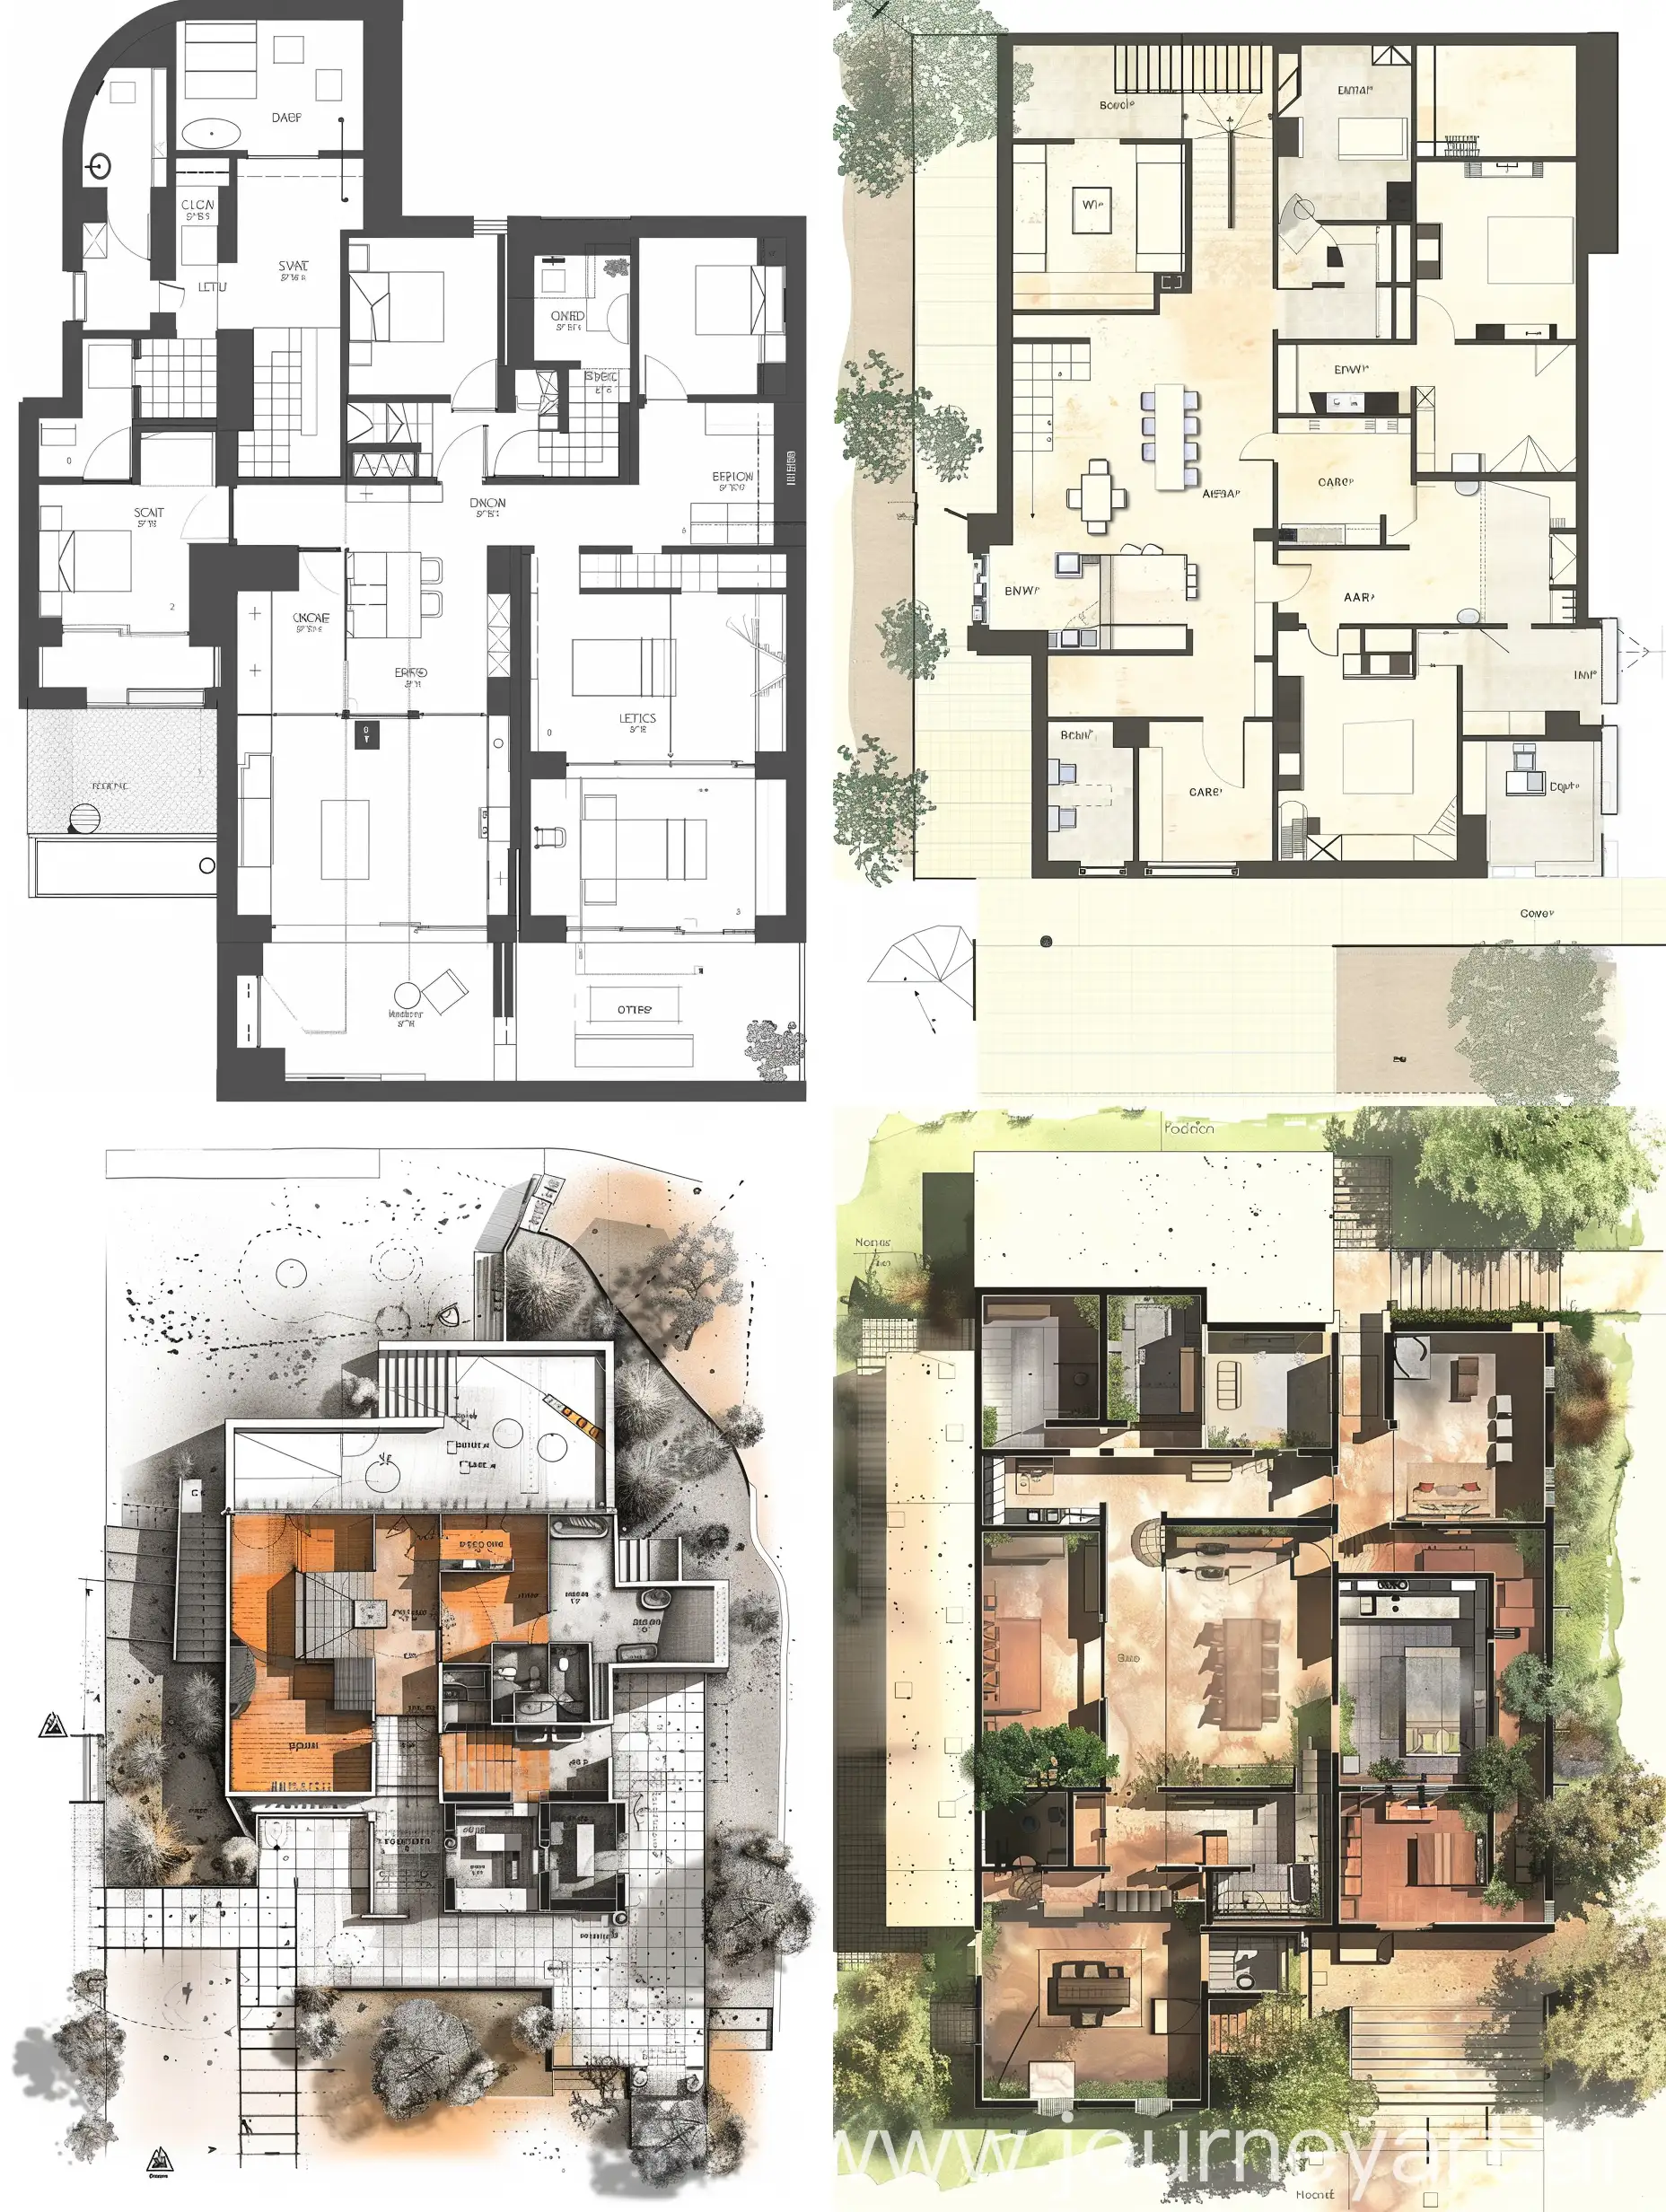 Modern-Architectural-Floor-Plan-with-Spacious-Layout